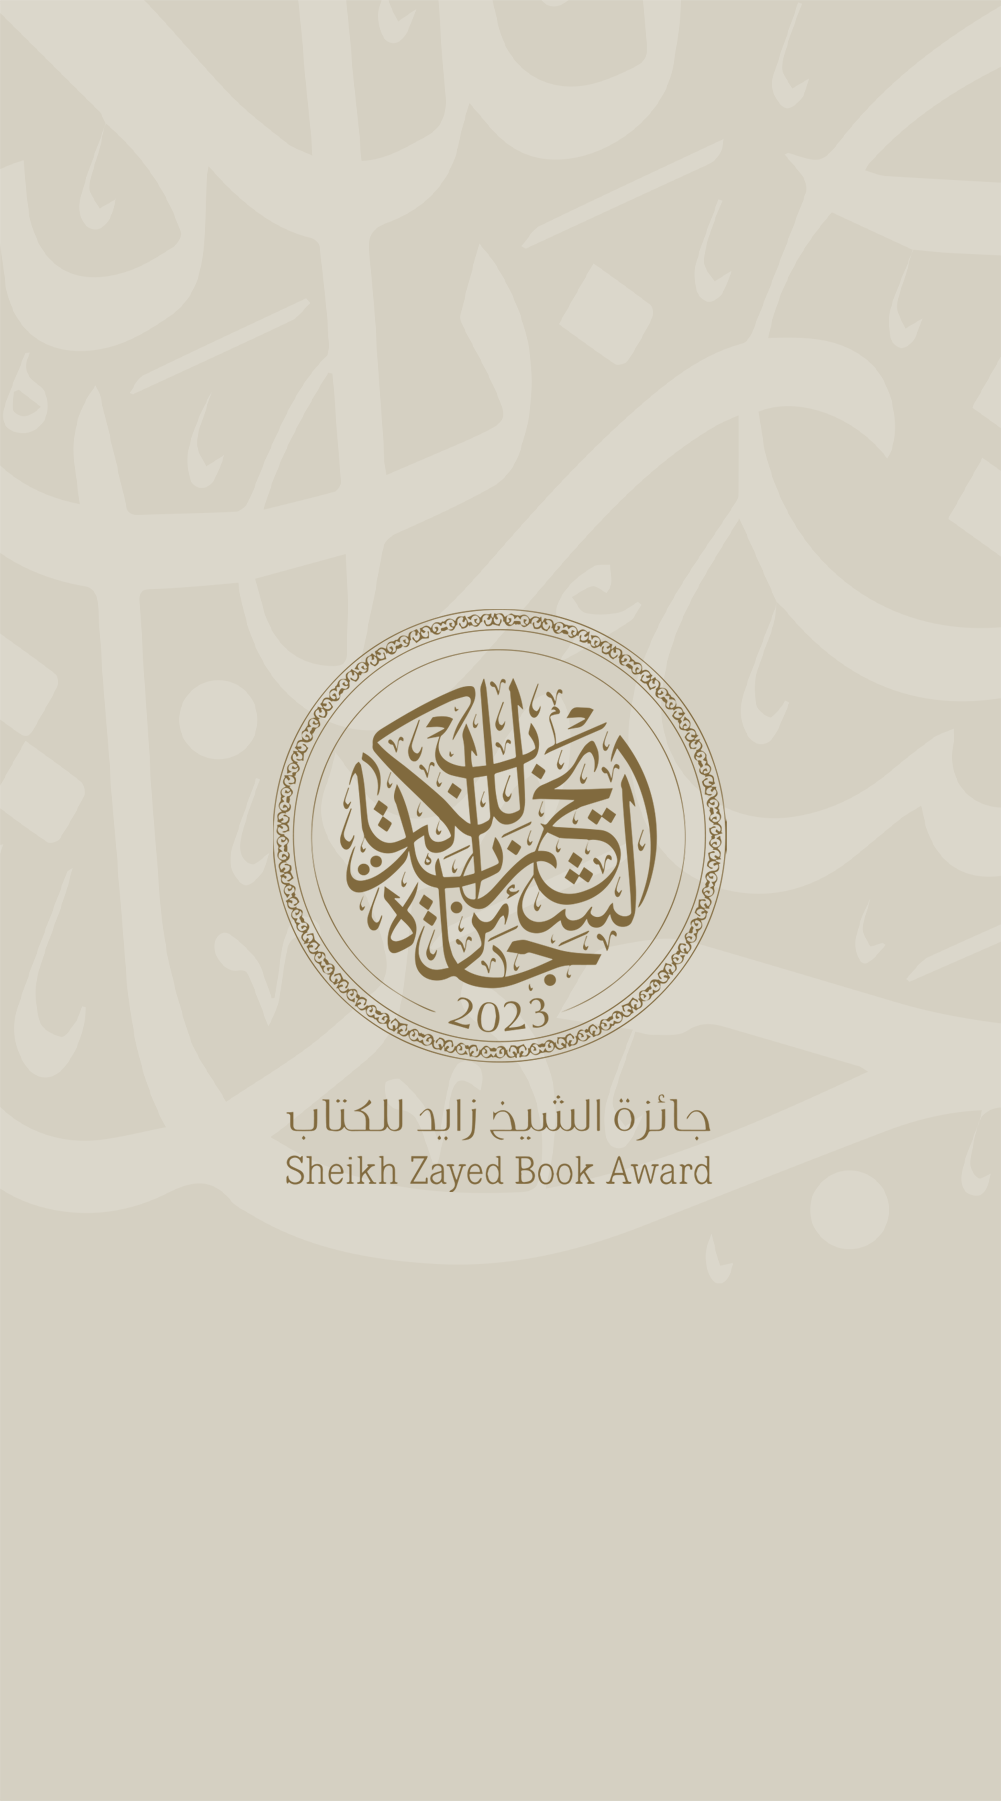 Sheikh Zayed Book Award Released 10 Translations in 2023